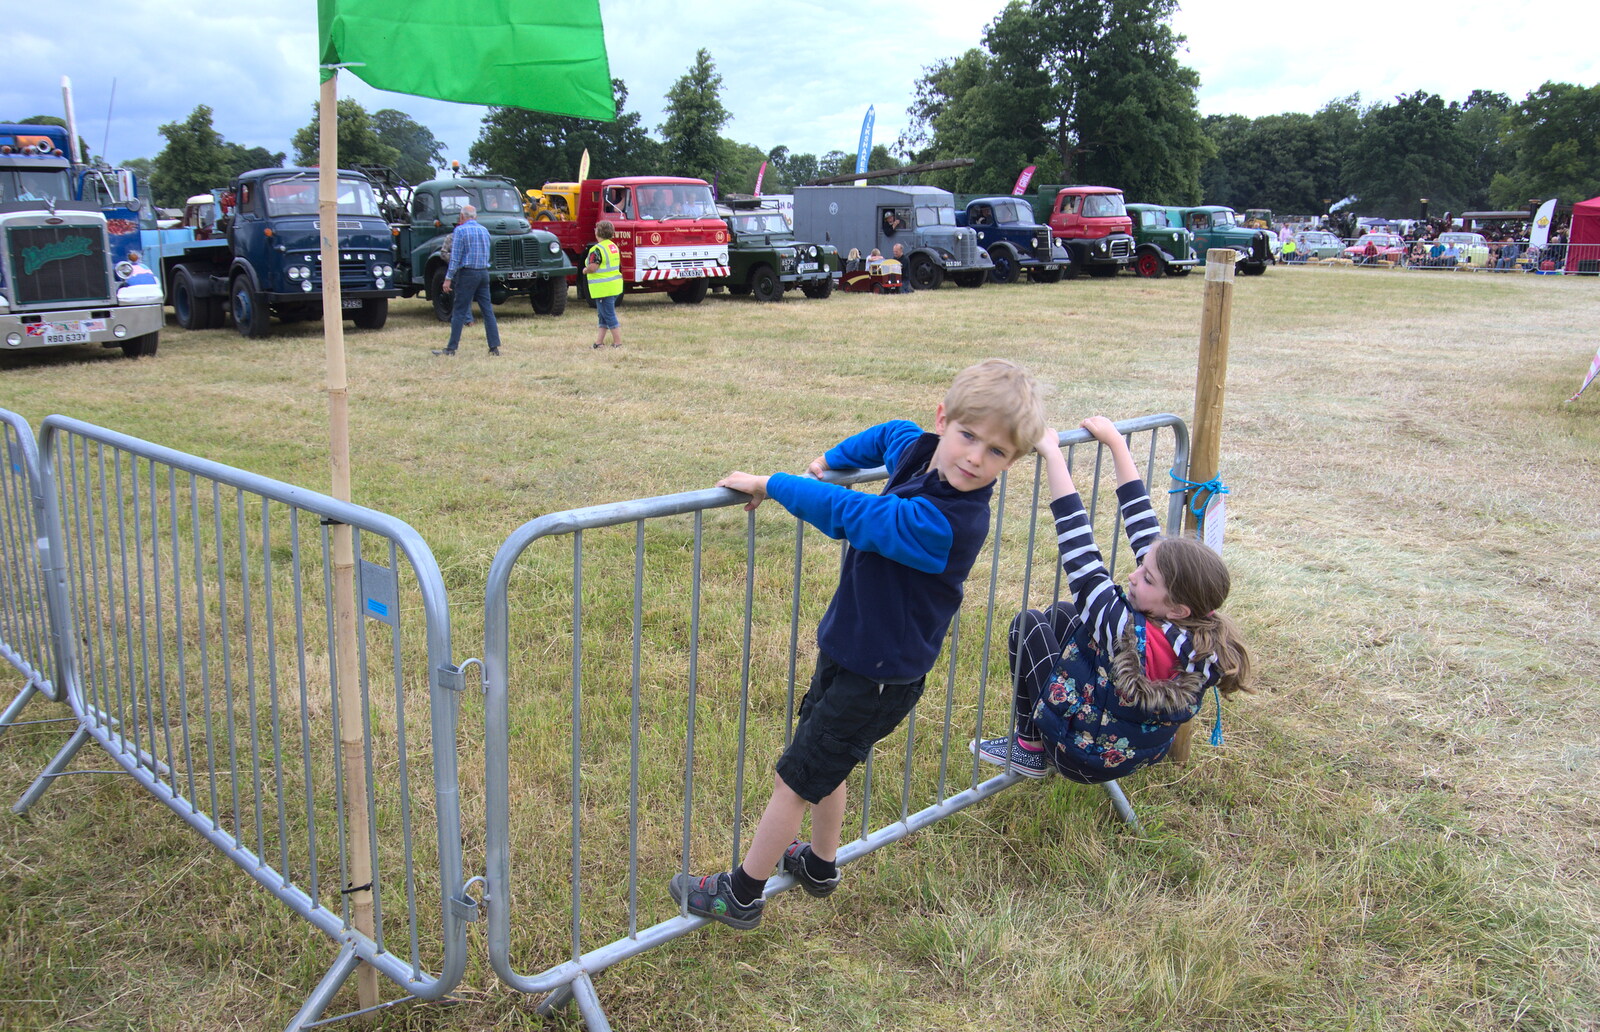 Harry and Amelia hang around the show ring from The Formerly-Known-As-The-Eye-Show, Palgrave, Suffolk - 17th June 2018